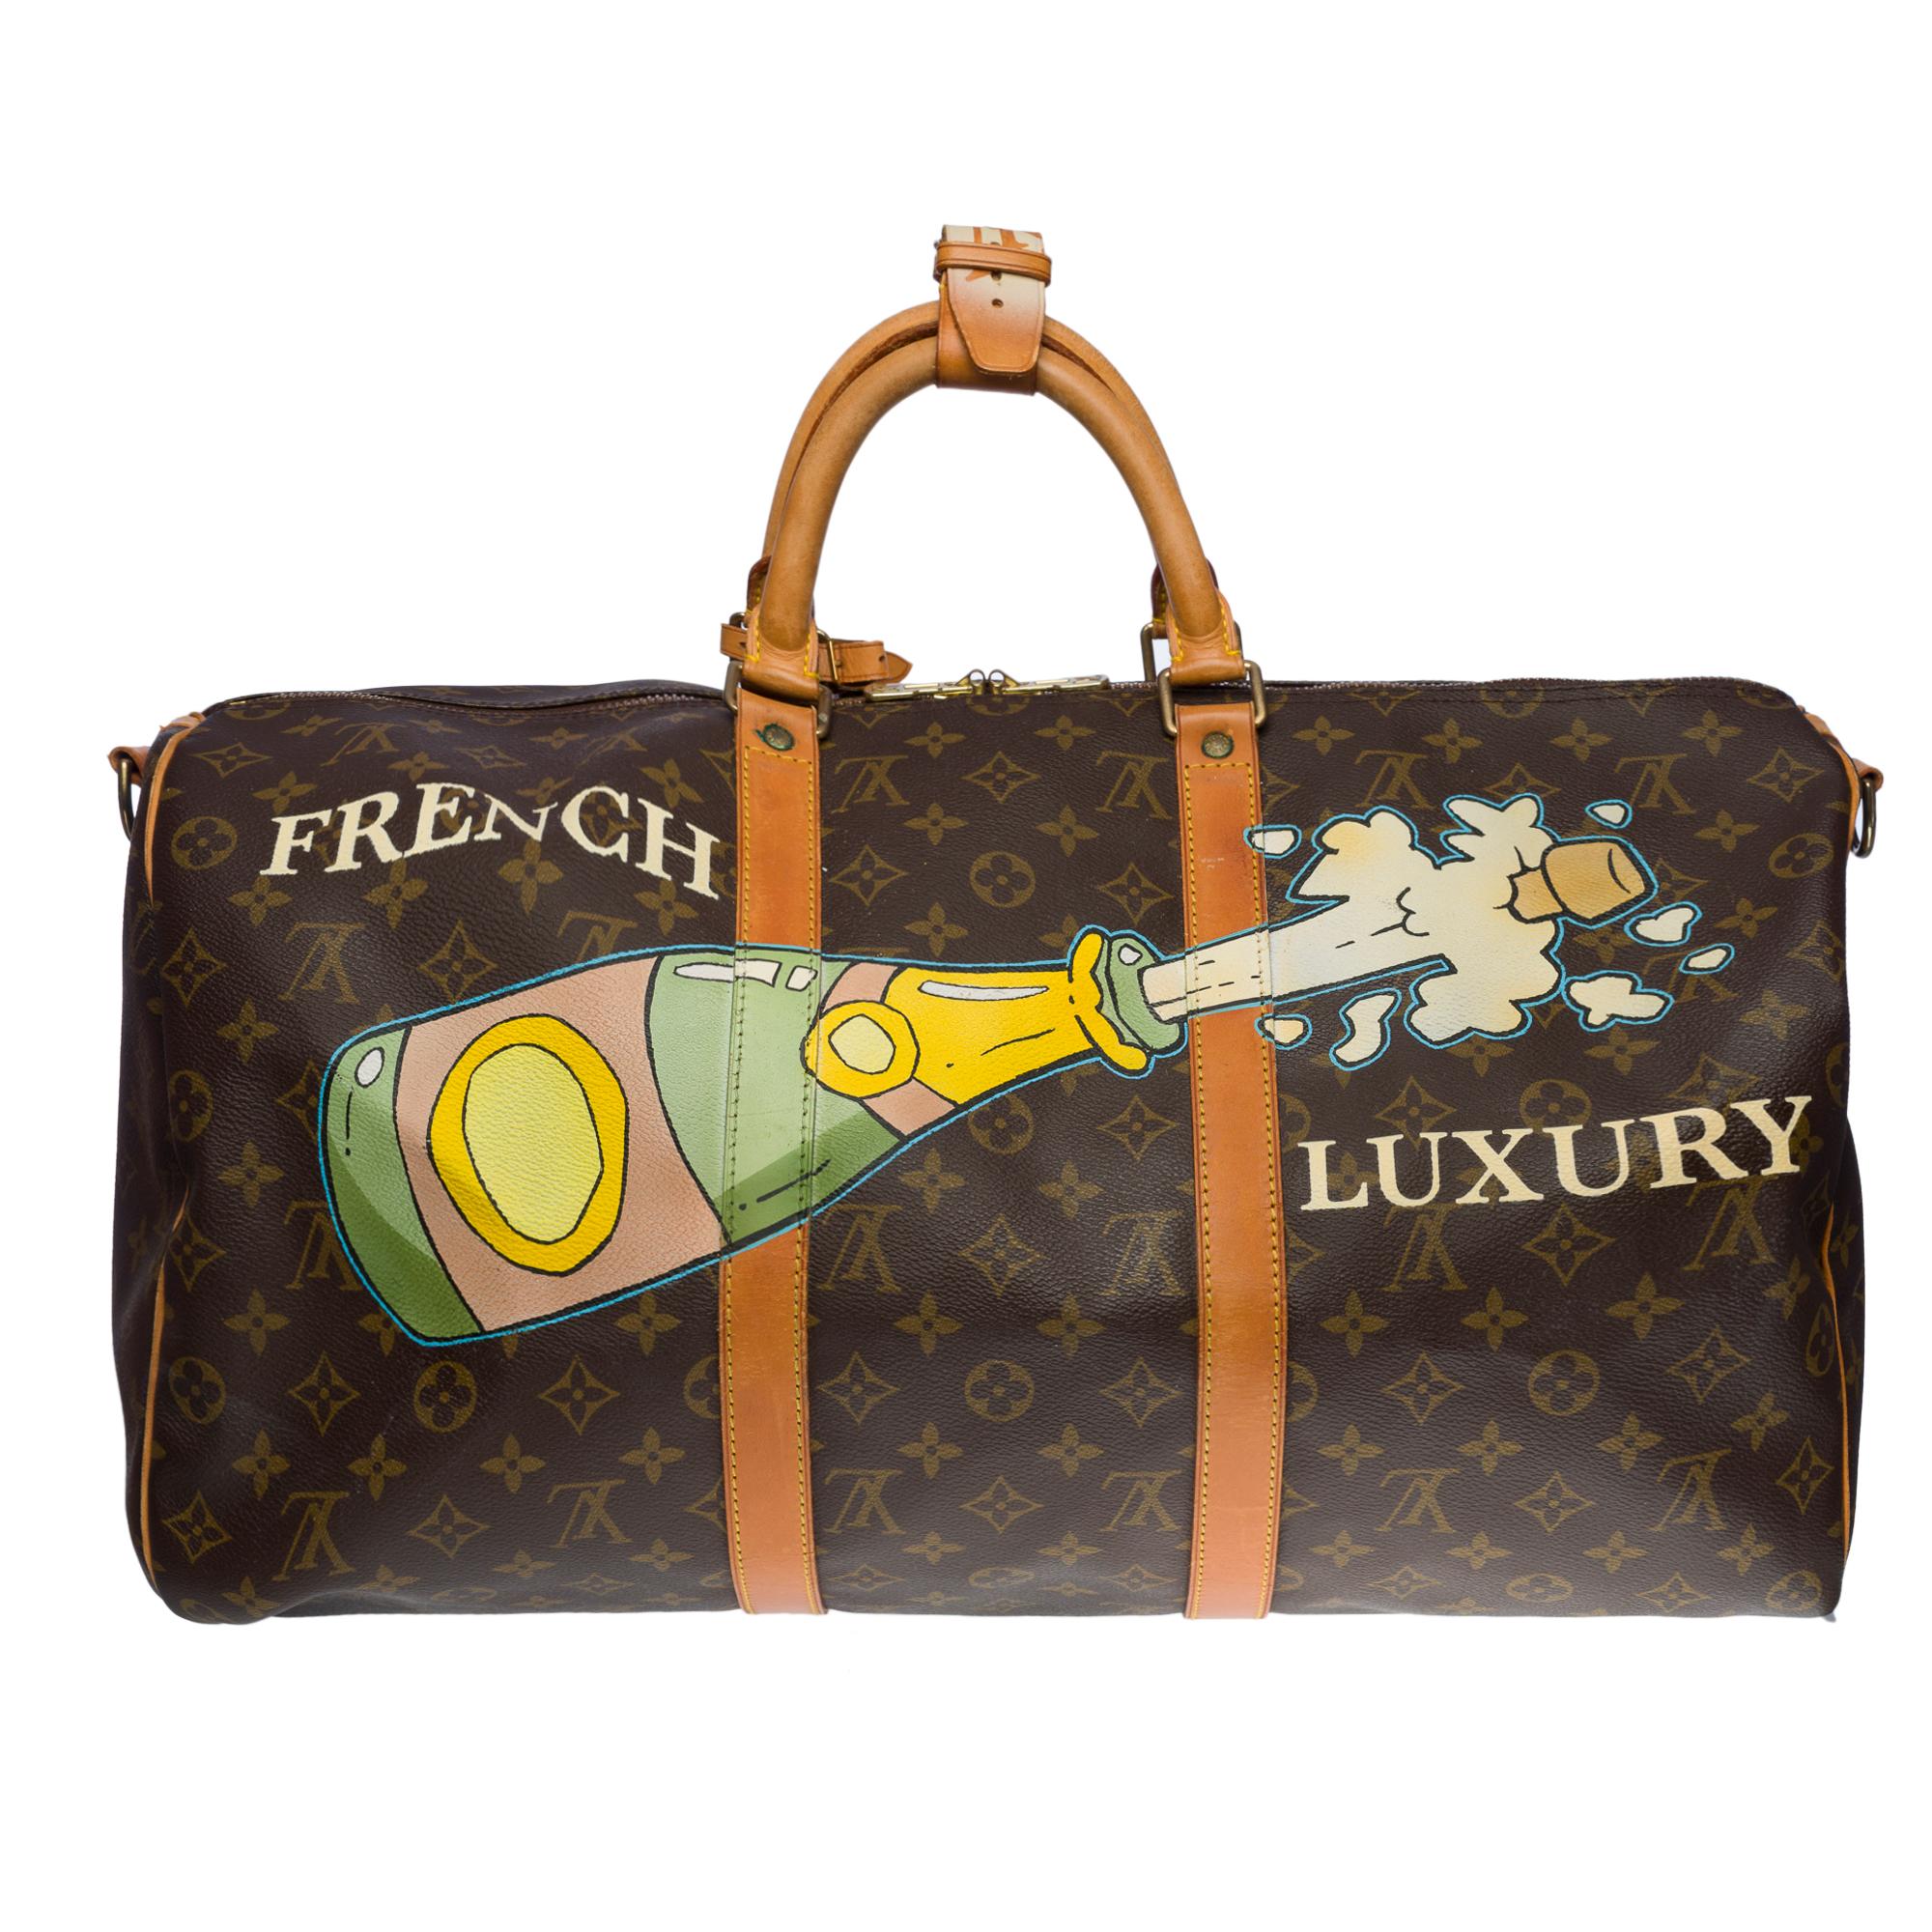 Exceptional travel bag Louis Vuitton Keepall 50 strap Travel bag in brown monogram canvas and natural leather customized 